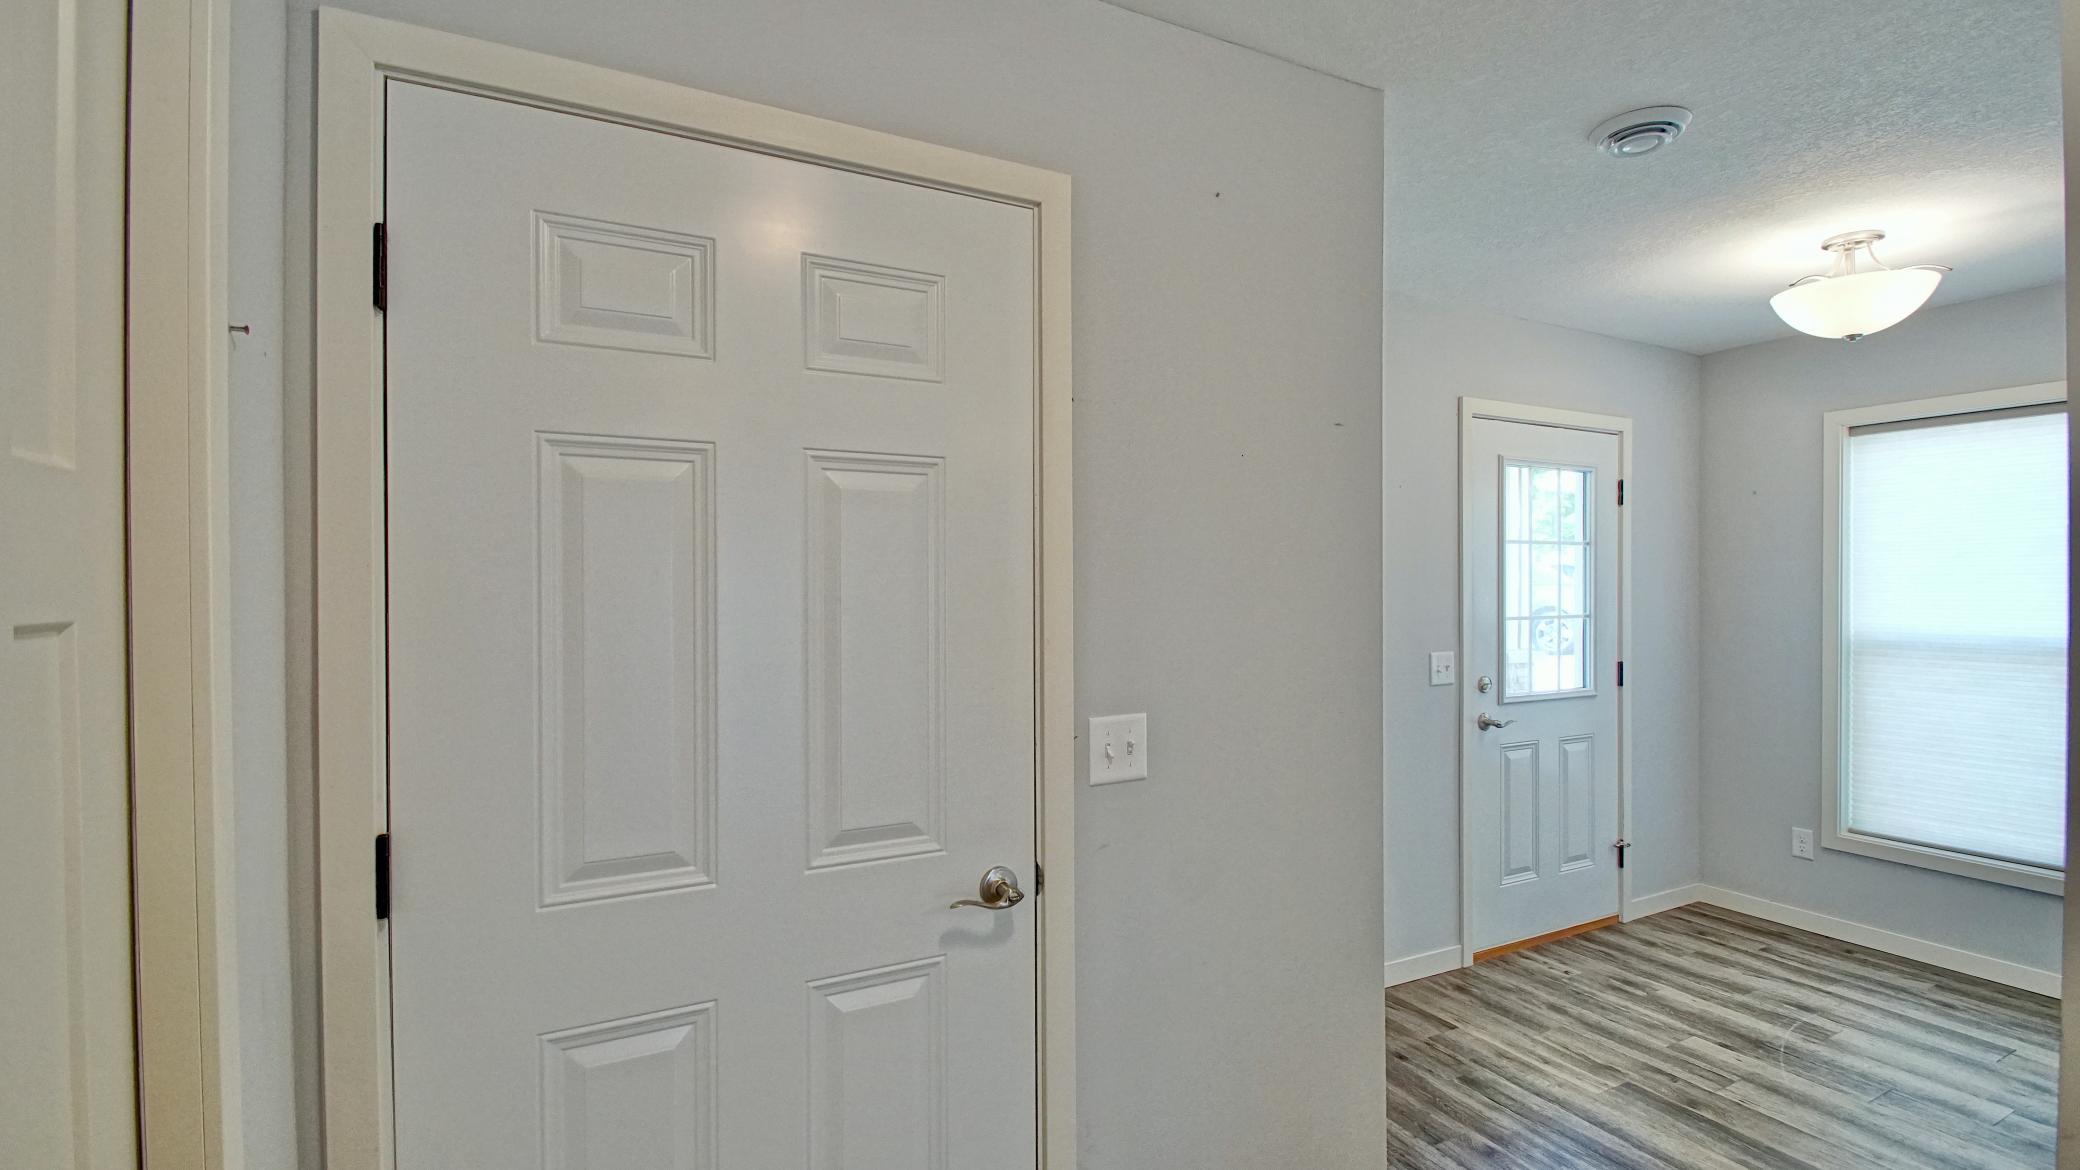 Door on the left opens to the attached, insulated 2 car Garage - Foyer and Front Entry to the right